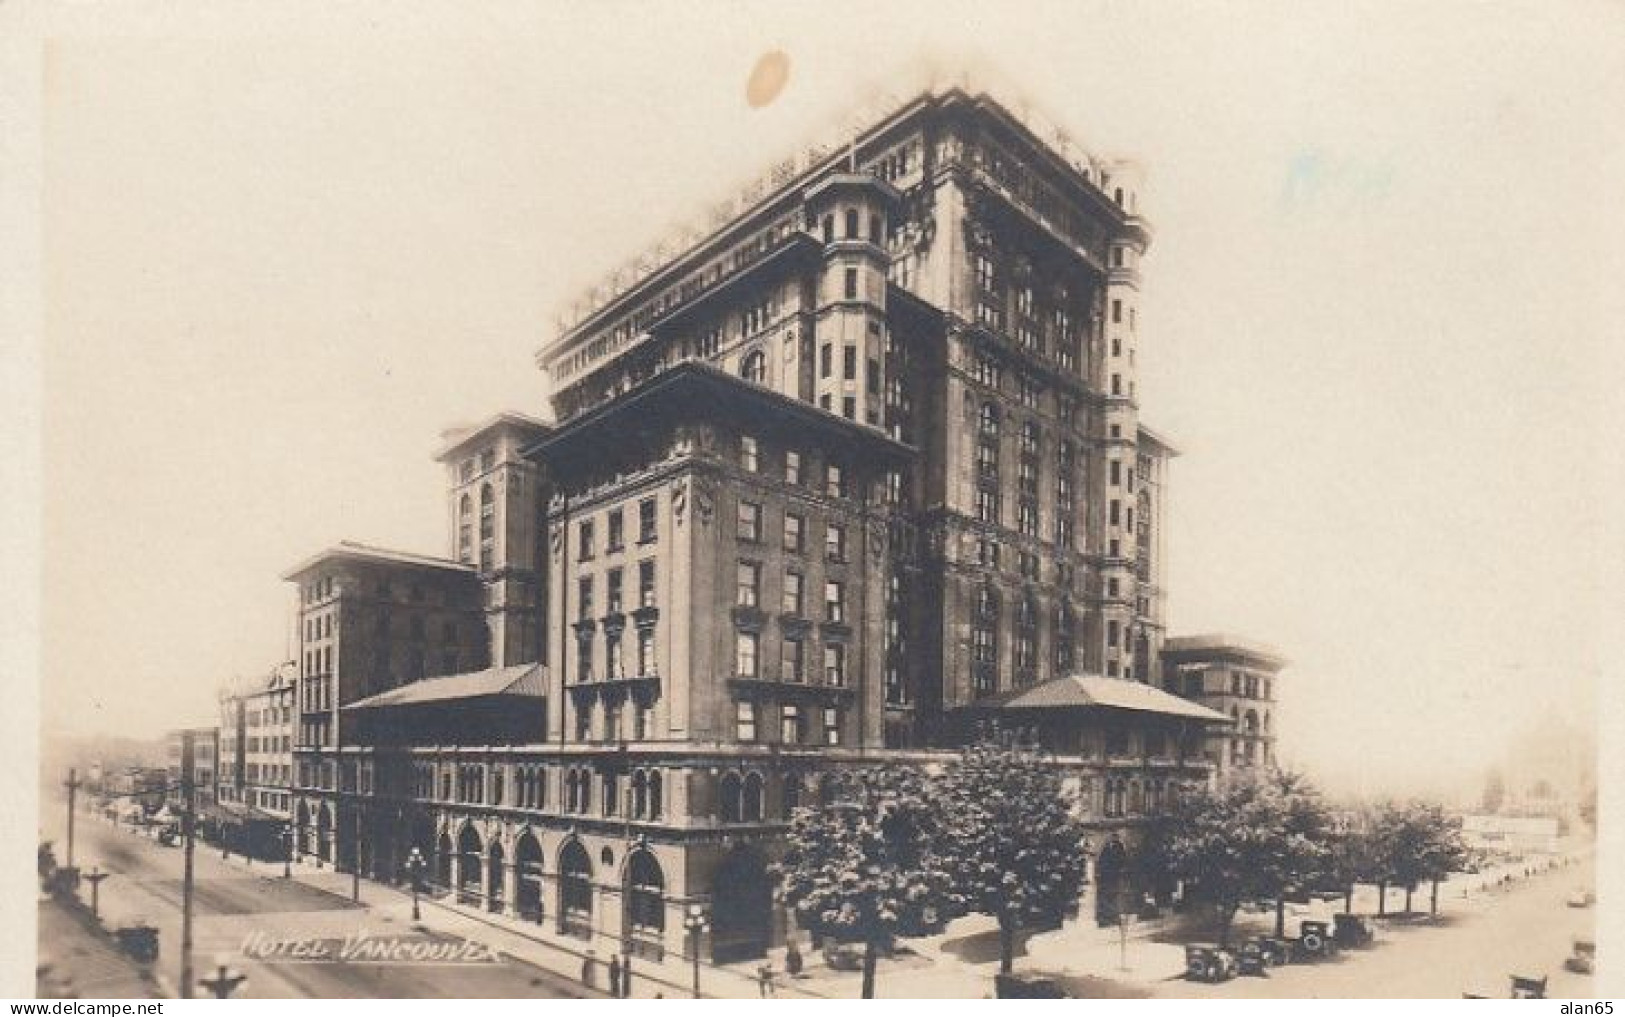 Vancouver BC Canada, Hotel Vancouver, C1910s/20s Vintage Real Photo Postcard - Vancouver